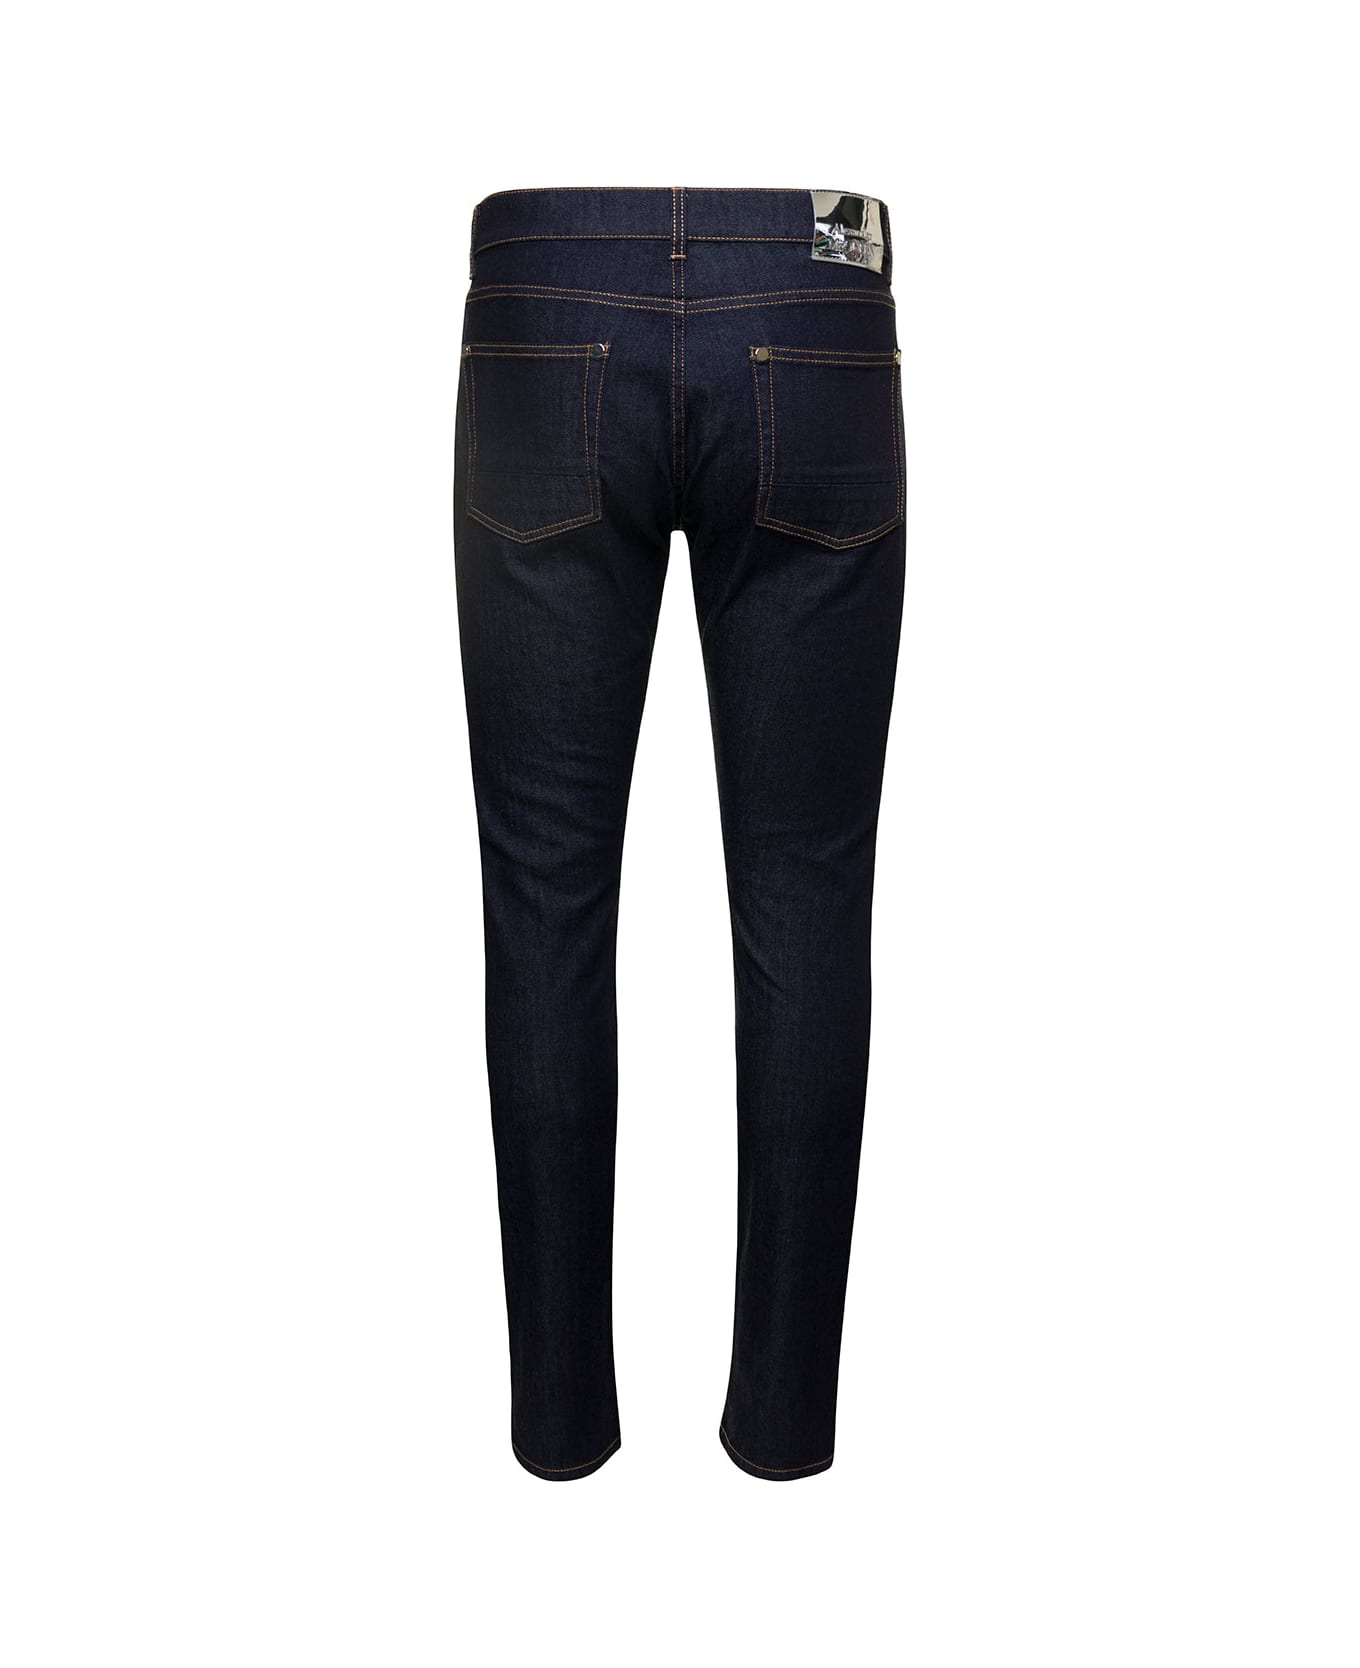 Alexander McQueen Blue Tight Pants With Metallic Logo Patch And Contrasting Stitching In Cotton Denim Man - Blu